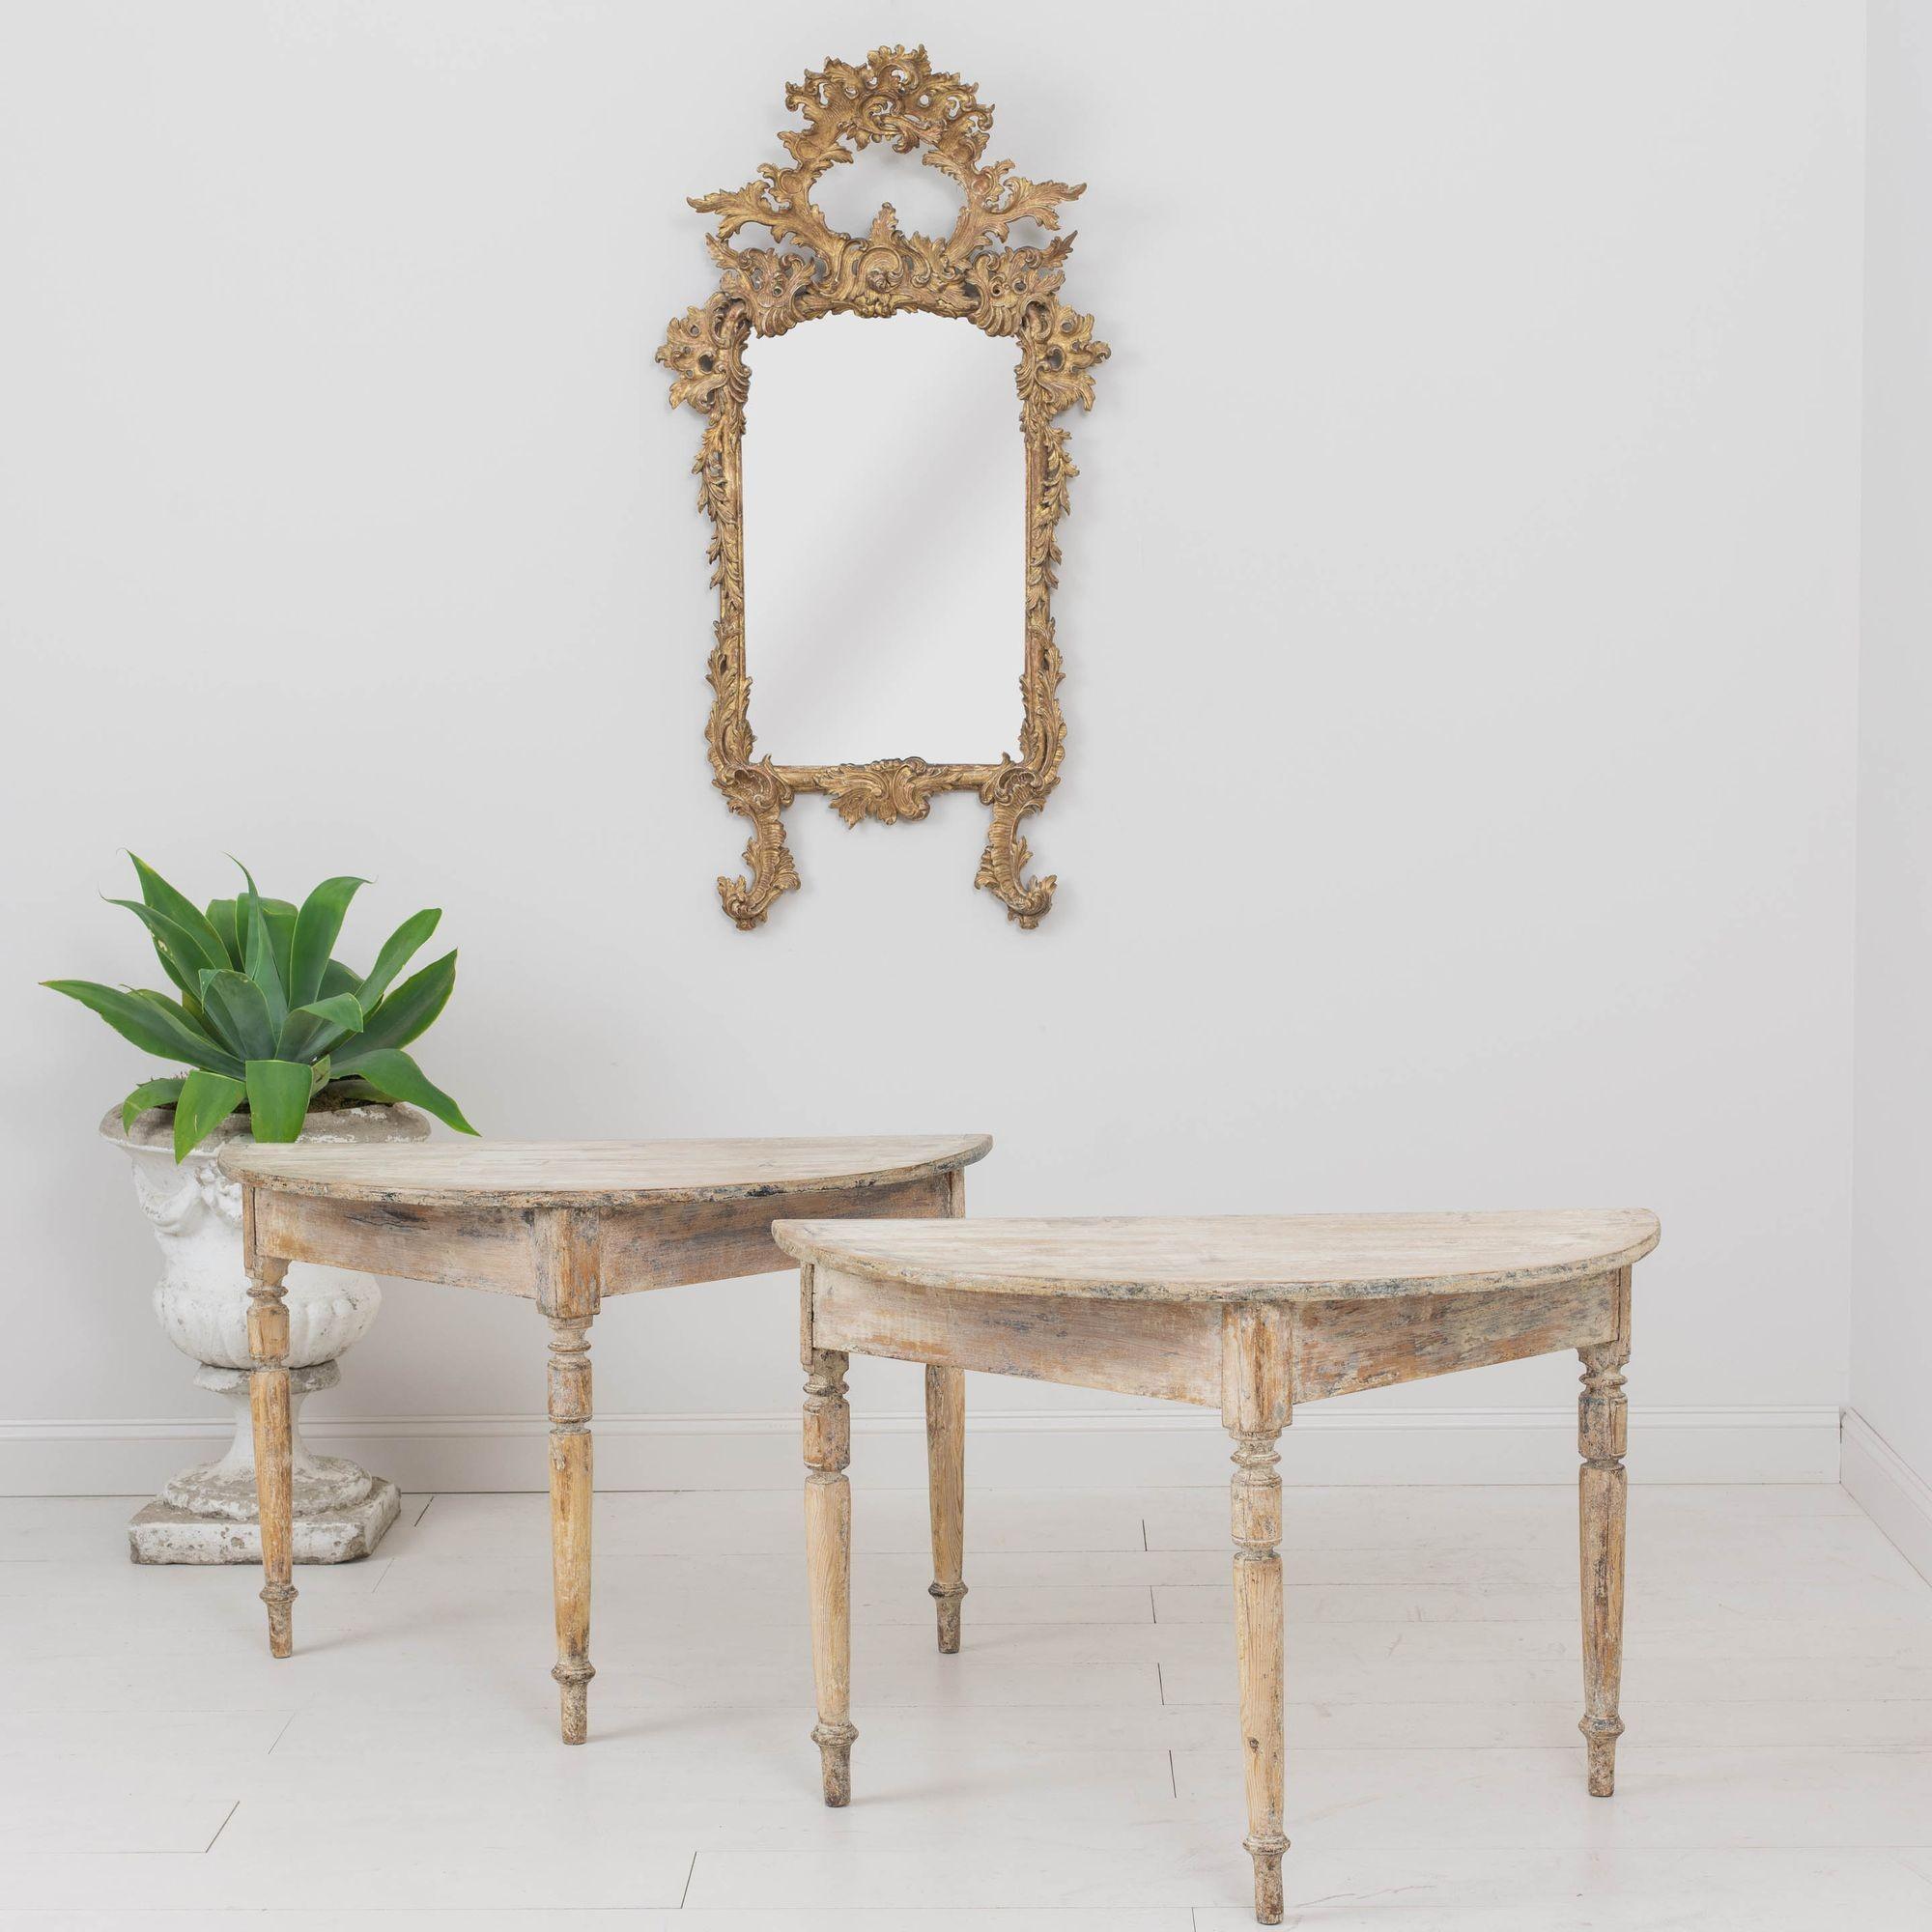 A 19th century pair of Swedish demilune tables in hand-scraped original paint standing on three turned legs, c. 1810. The pair can be used individually as console tables or joined together to form a dining table or center table. This pair is truly